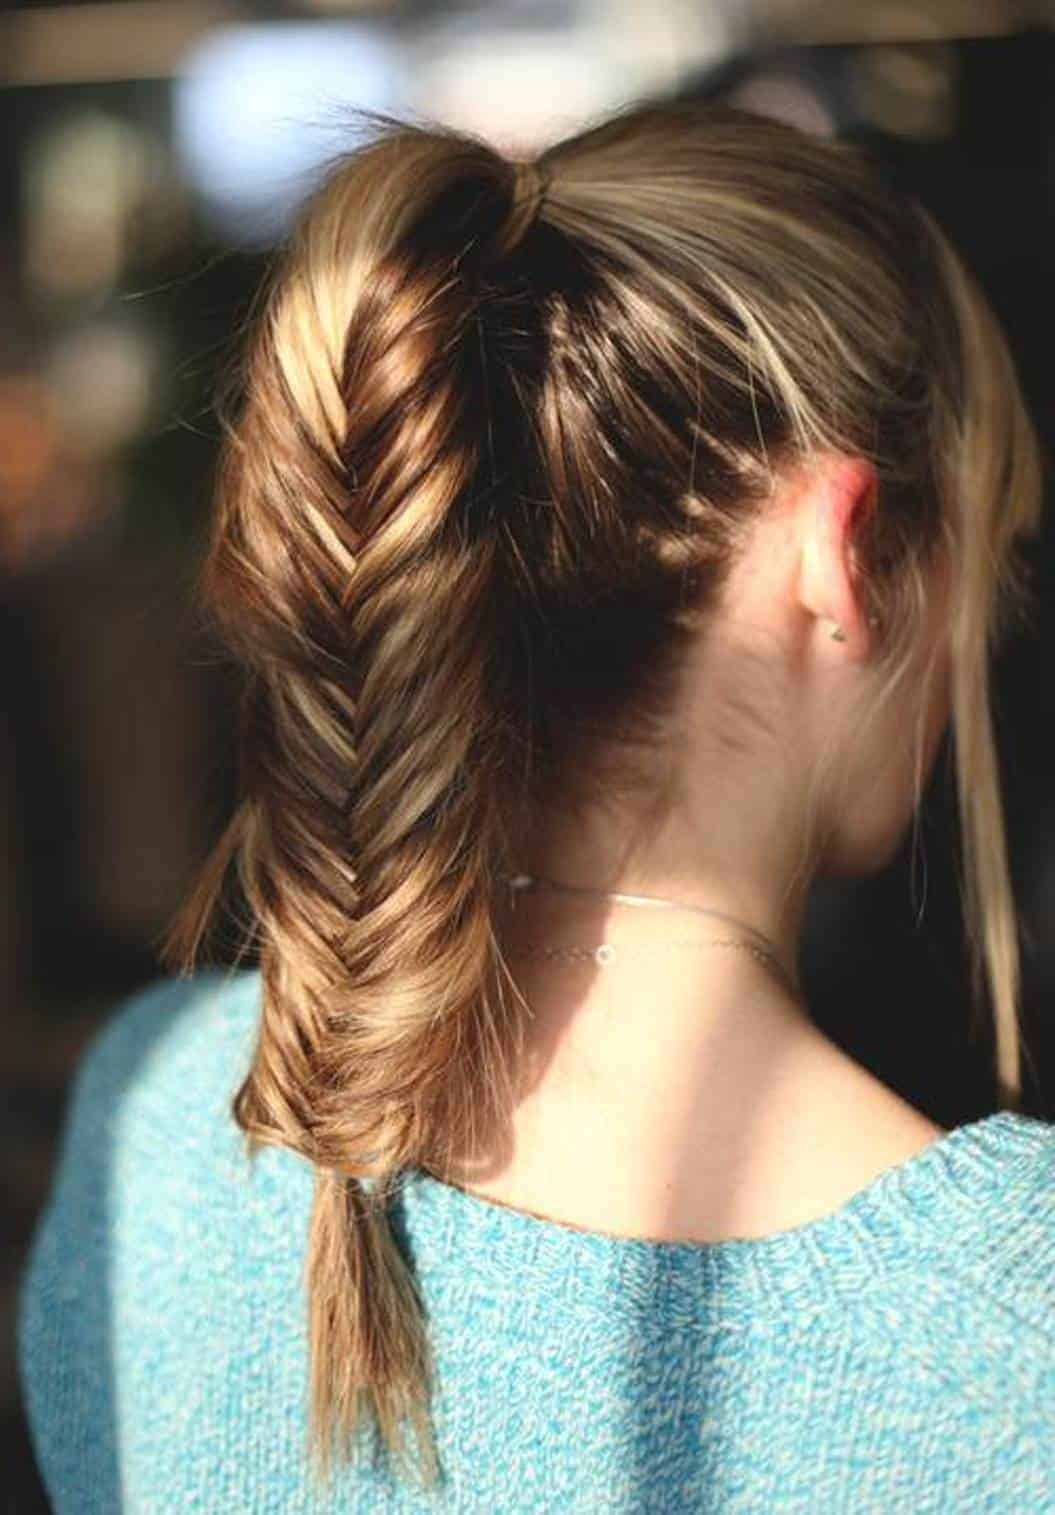 The fashion for schools Ponytail hairstyles for long hair, Women styles